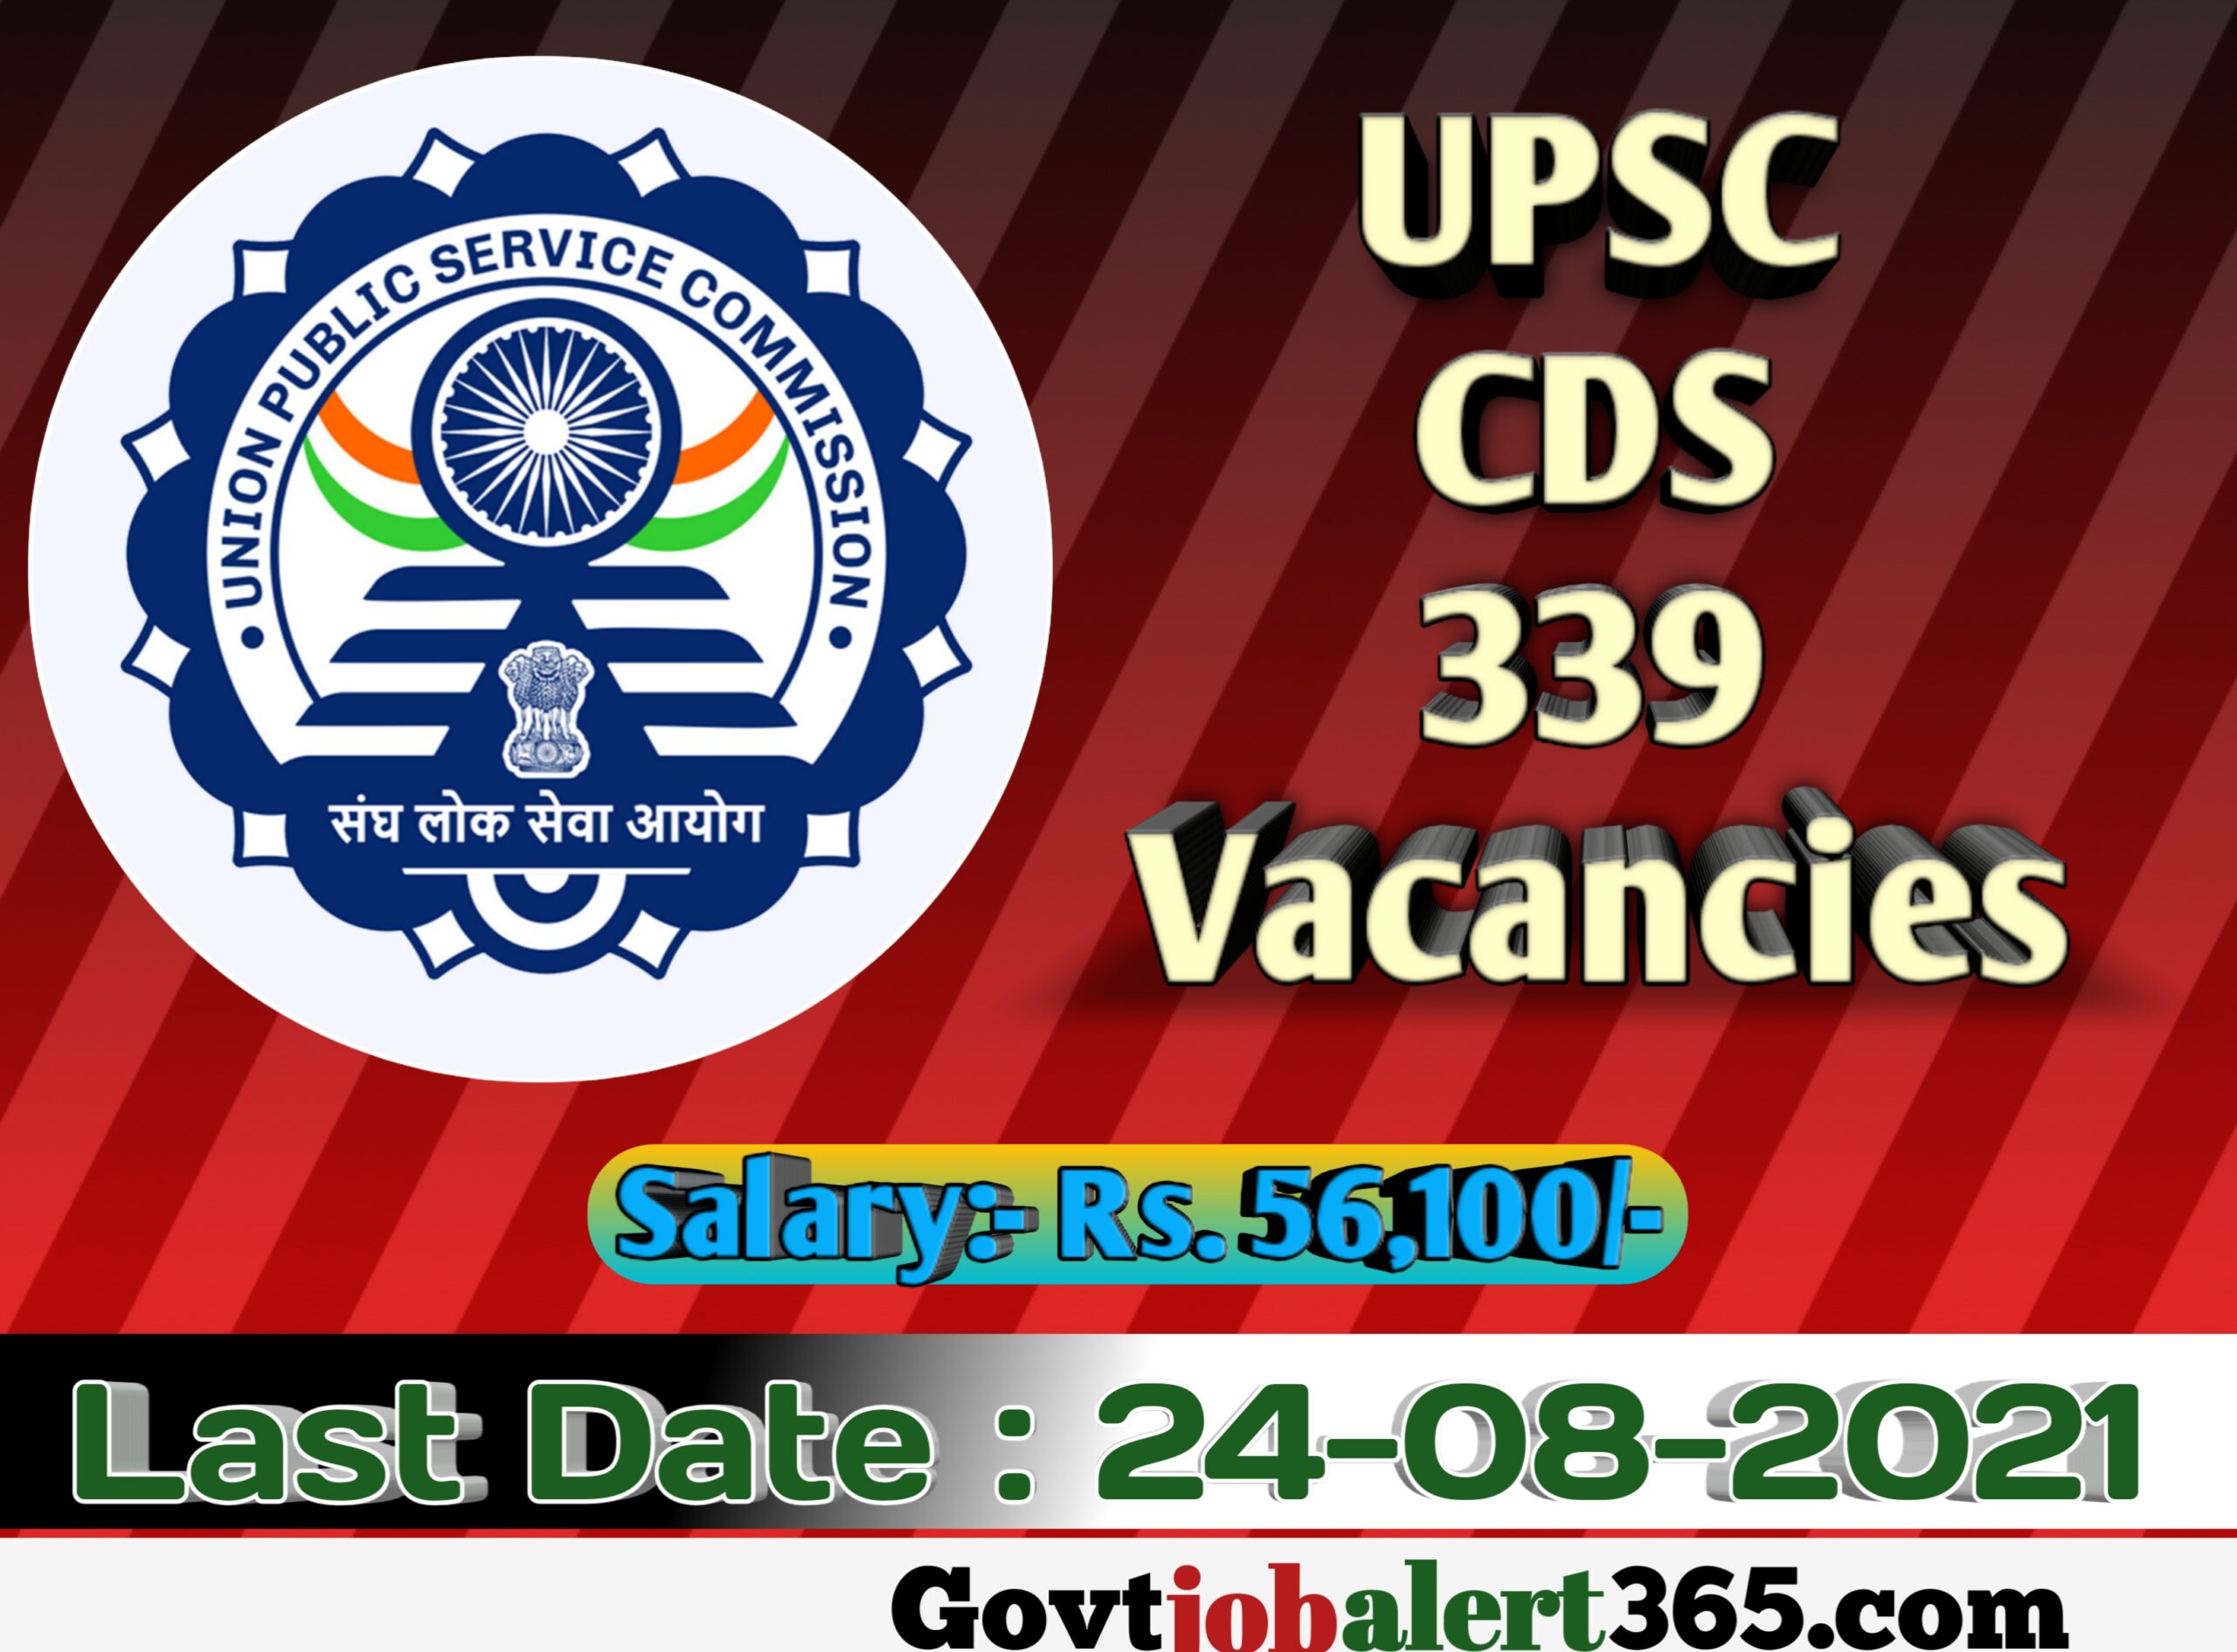 UPSC Combined Defence Service Examination (II) Notification